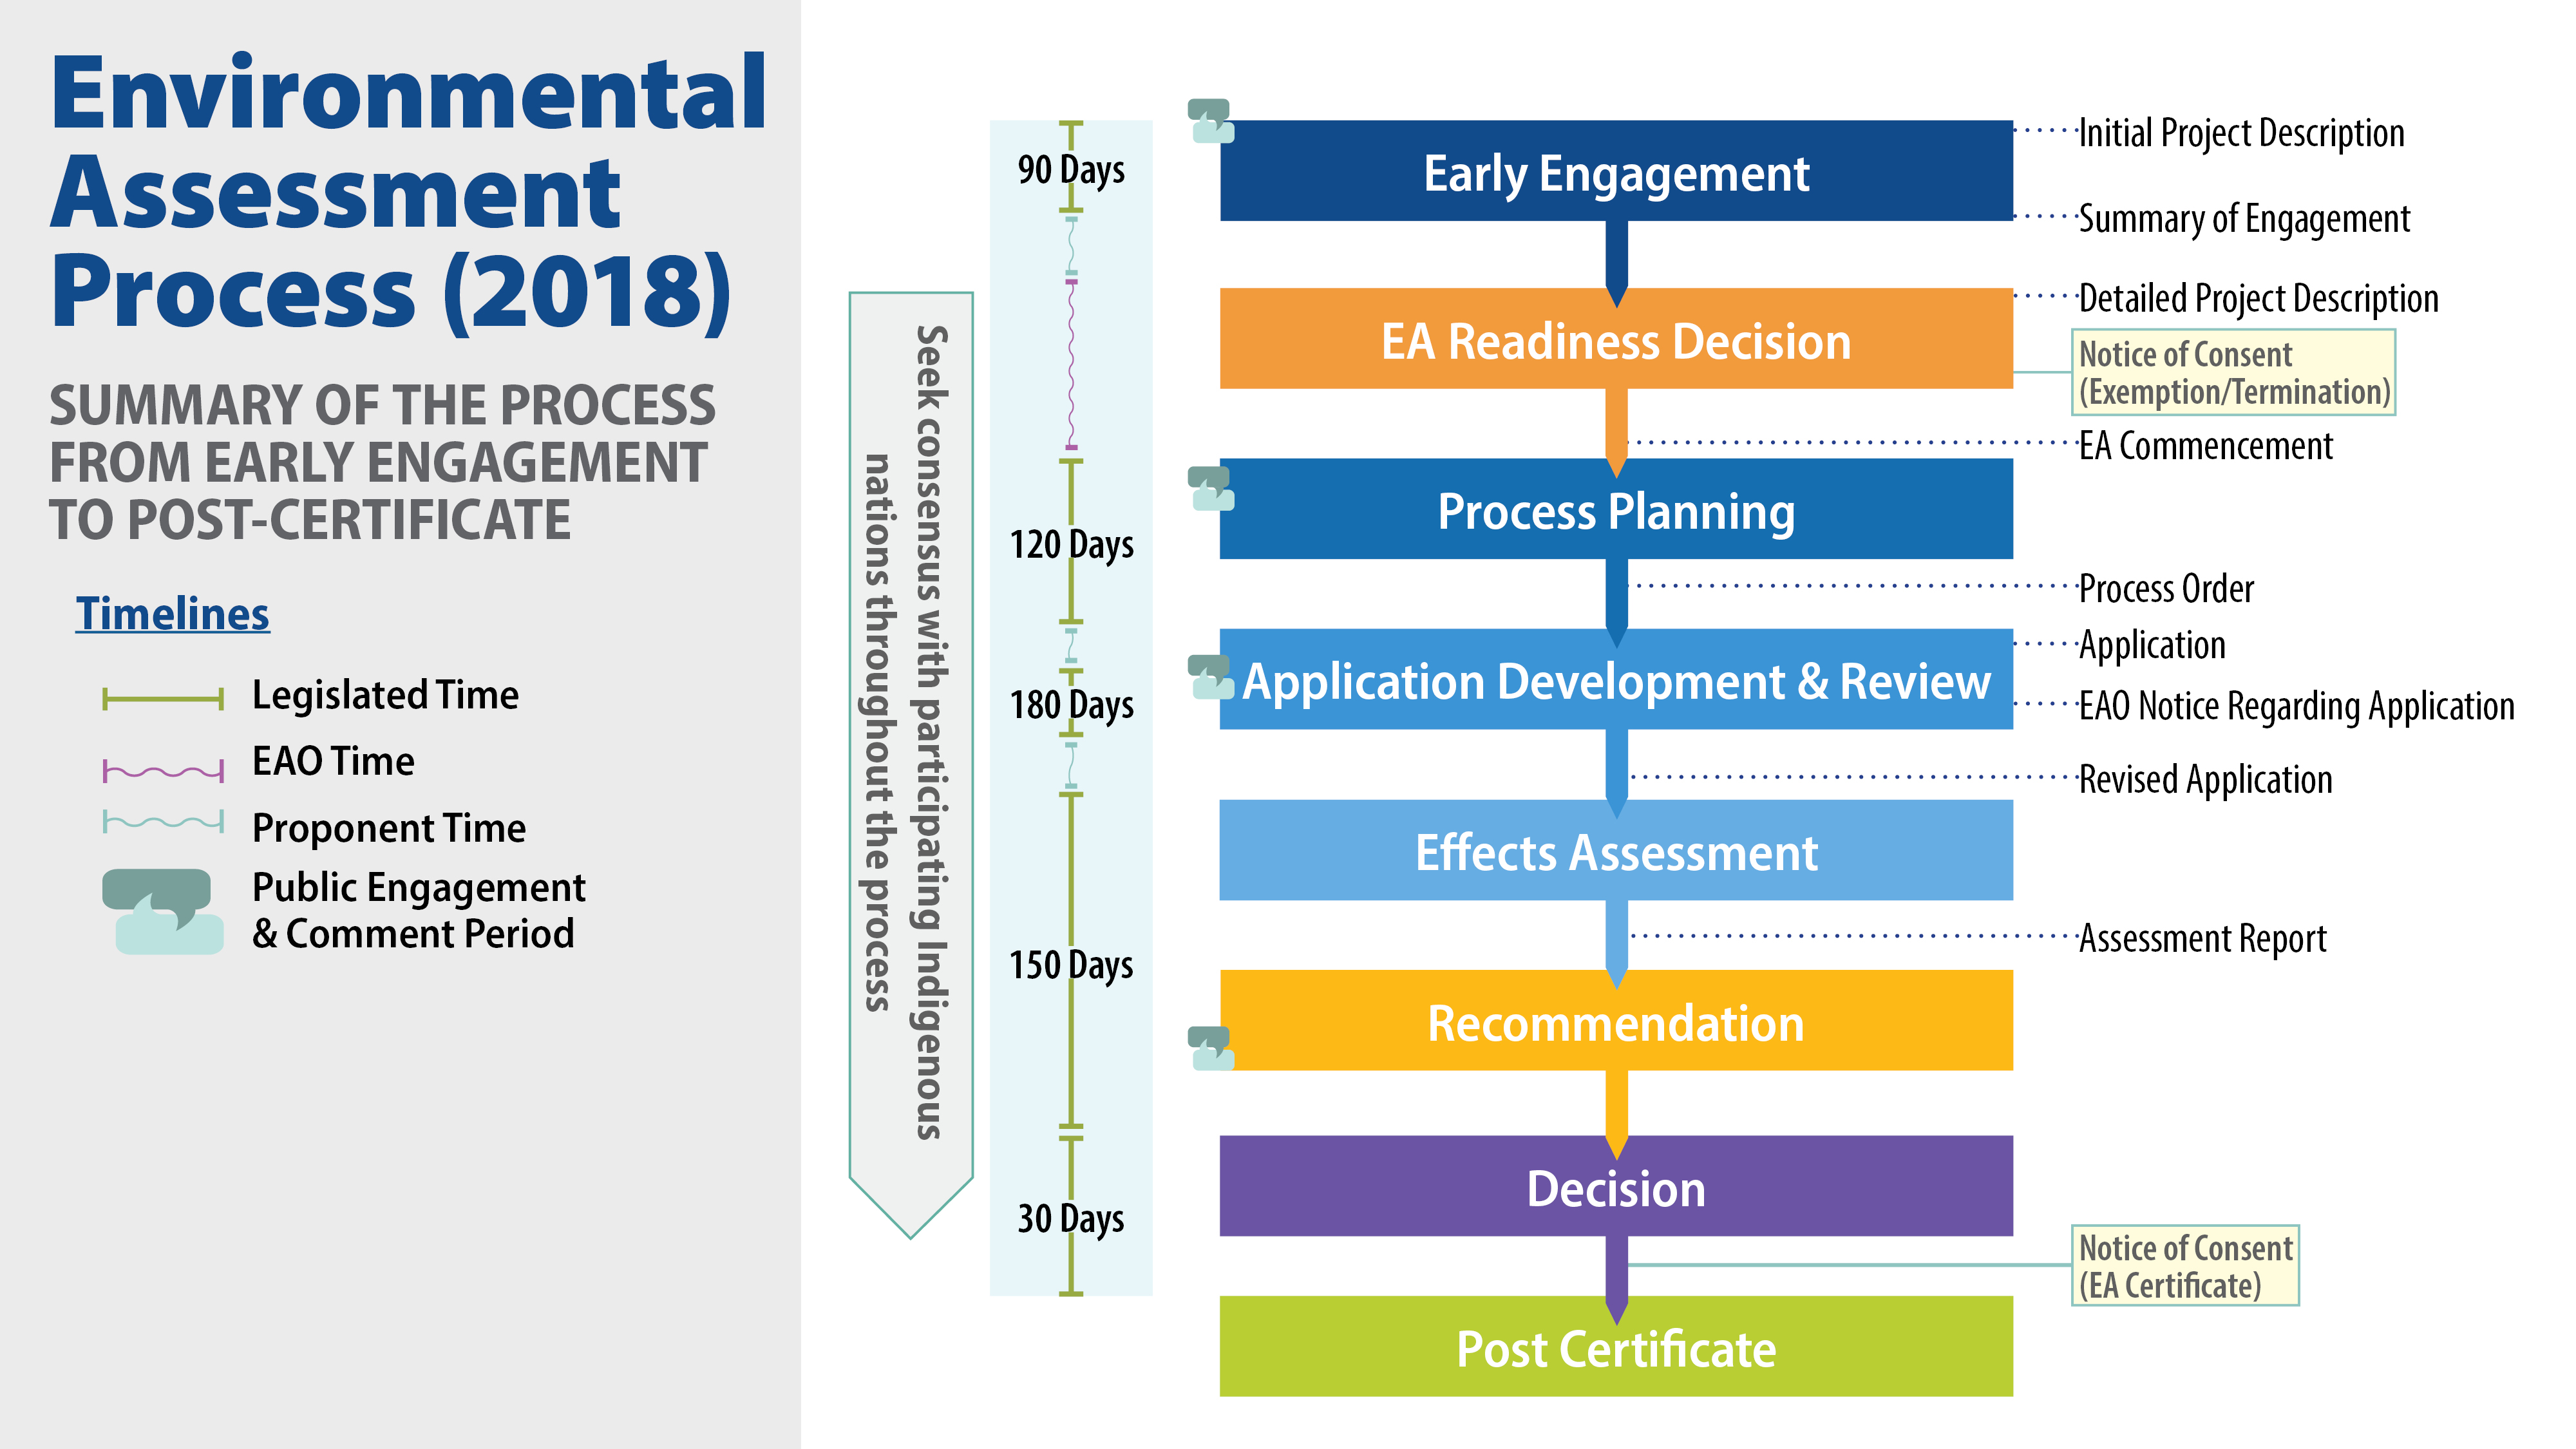 The Environmental Assessment process timeline image